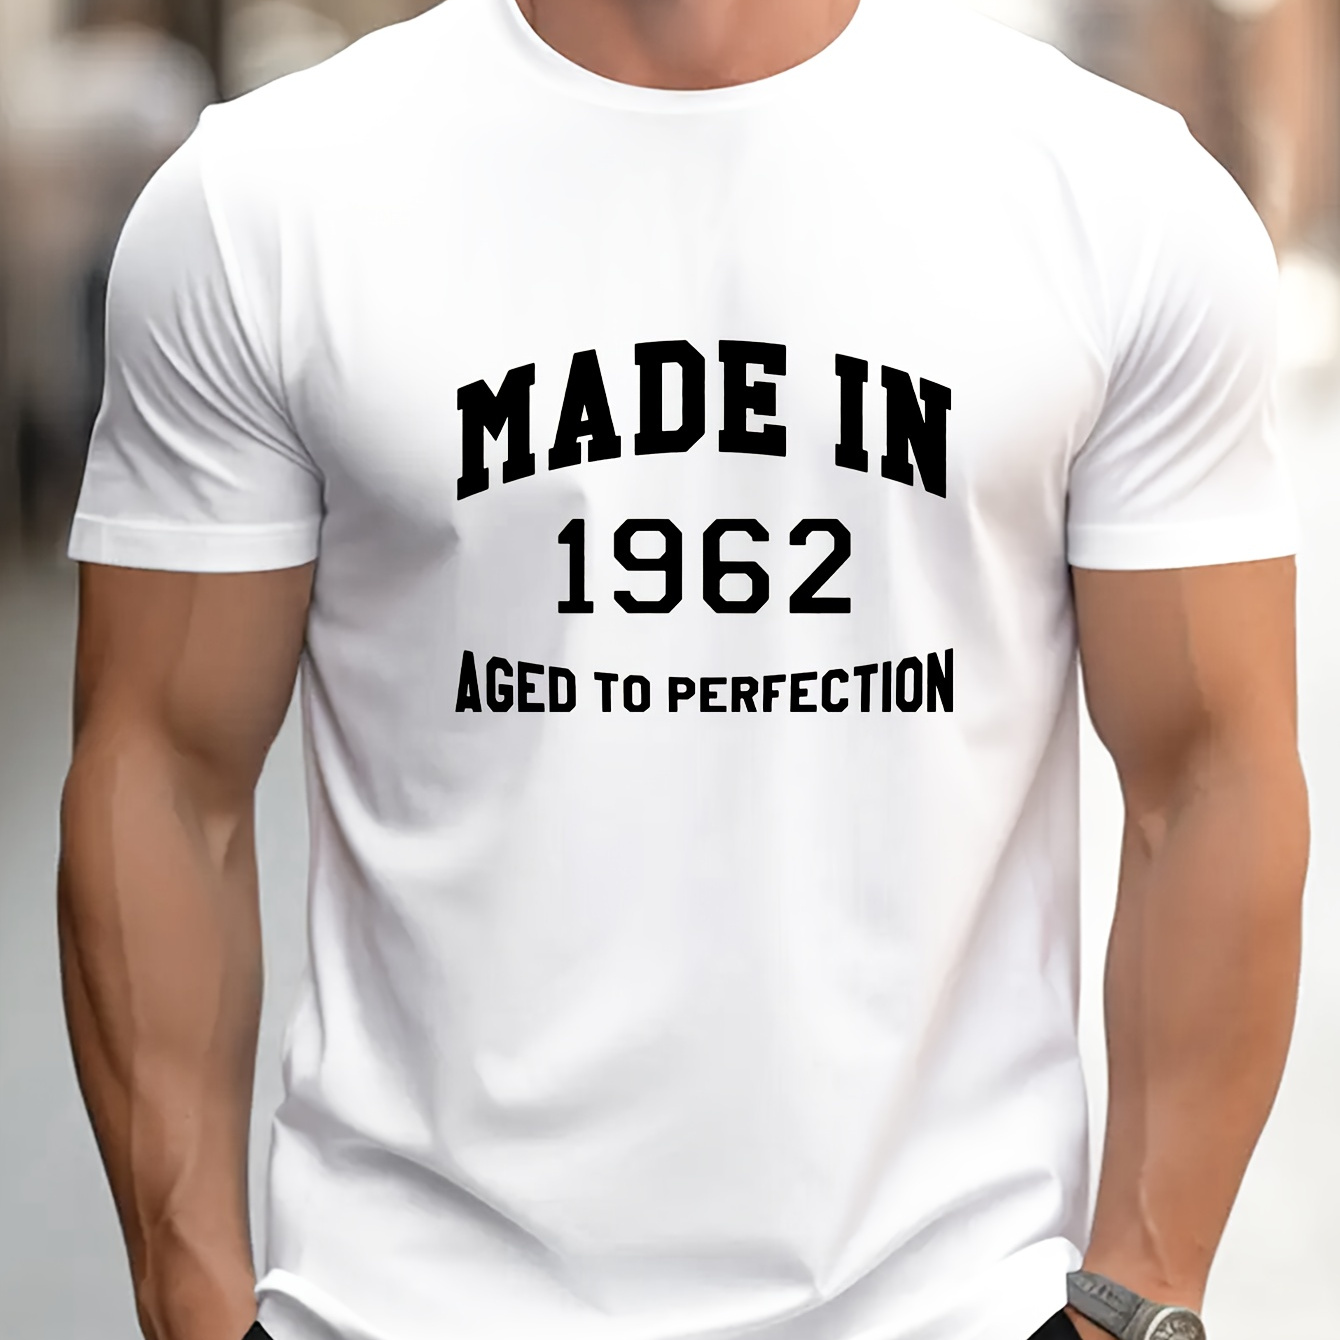 

Made In 1962 Alphabet Print Crew Neck Short Sleeve T-shirt For Men, Casual Summer T-shirt For Daily Wear And Vacation Resorts